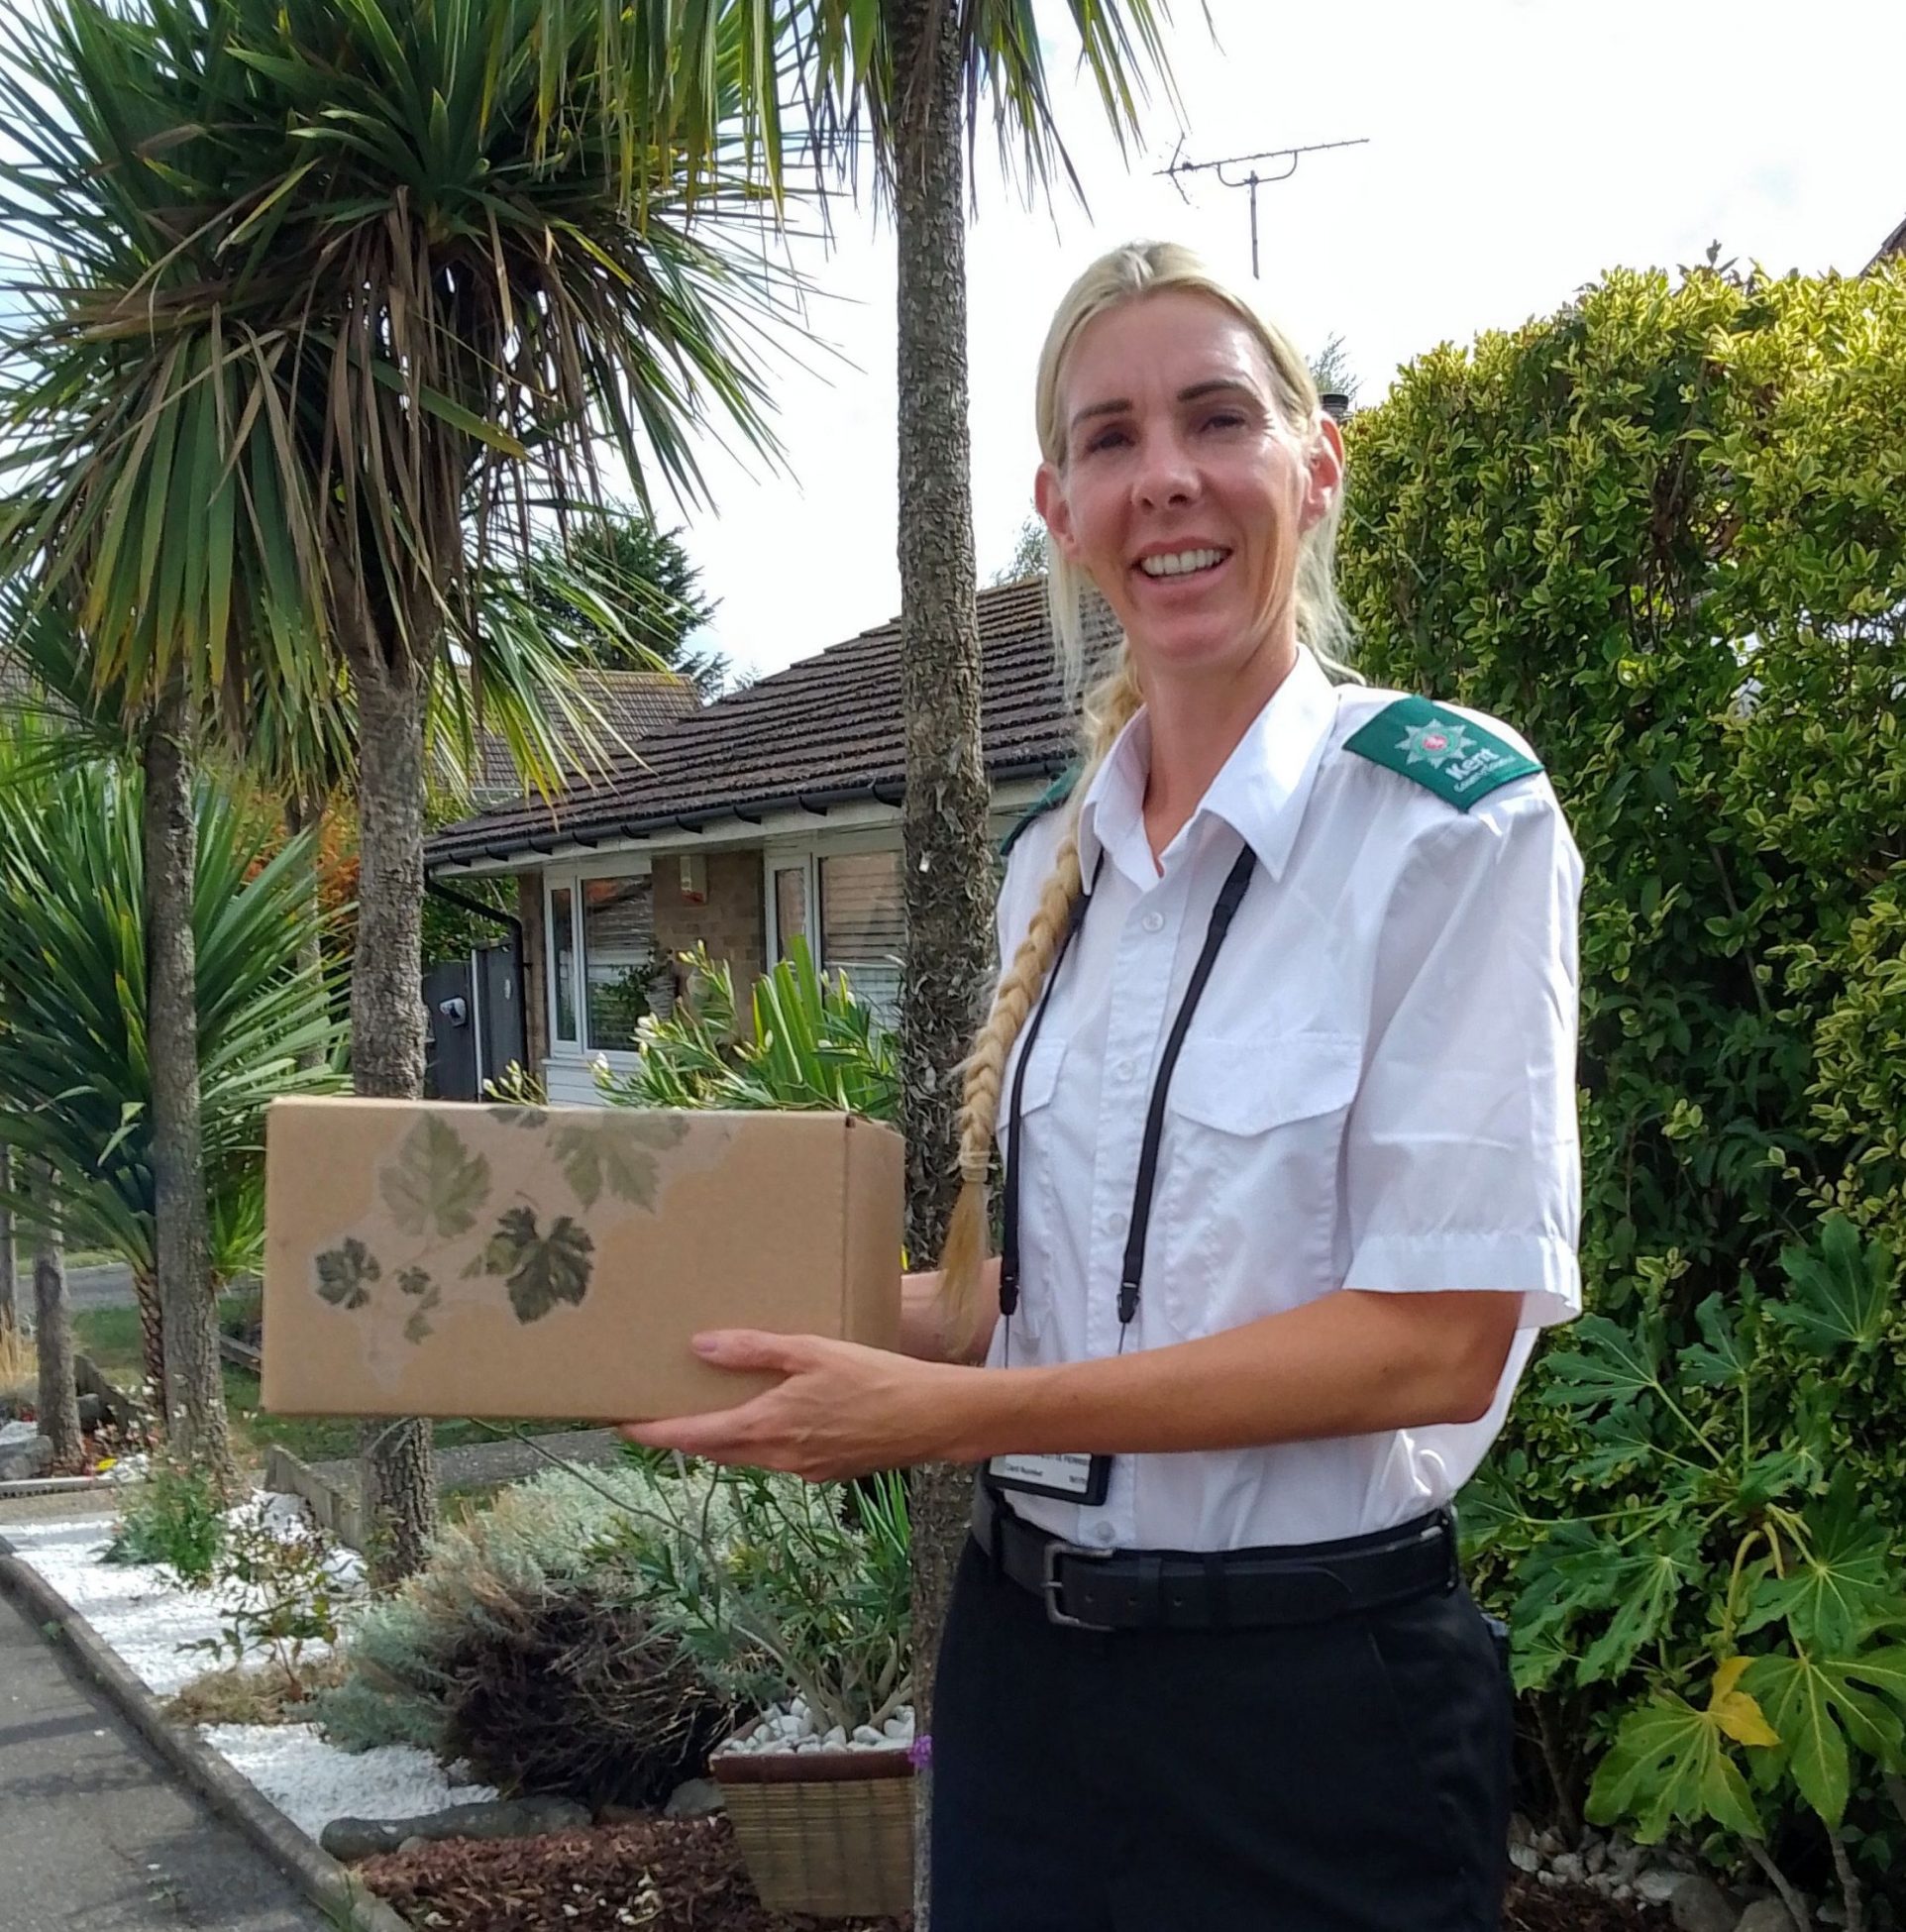 A community warden delivering one of the forest bathing boxes. She is blonde with a pony tail and is wearing a white and green smart uniform.